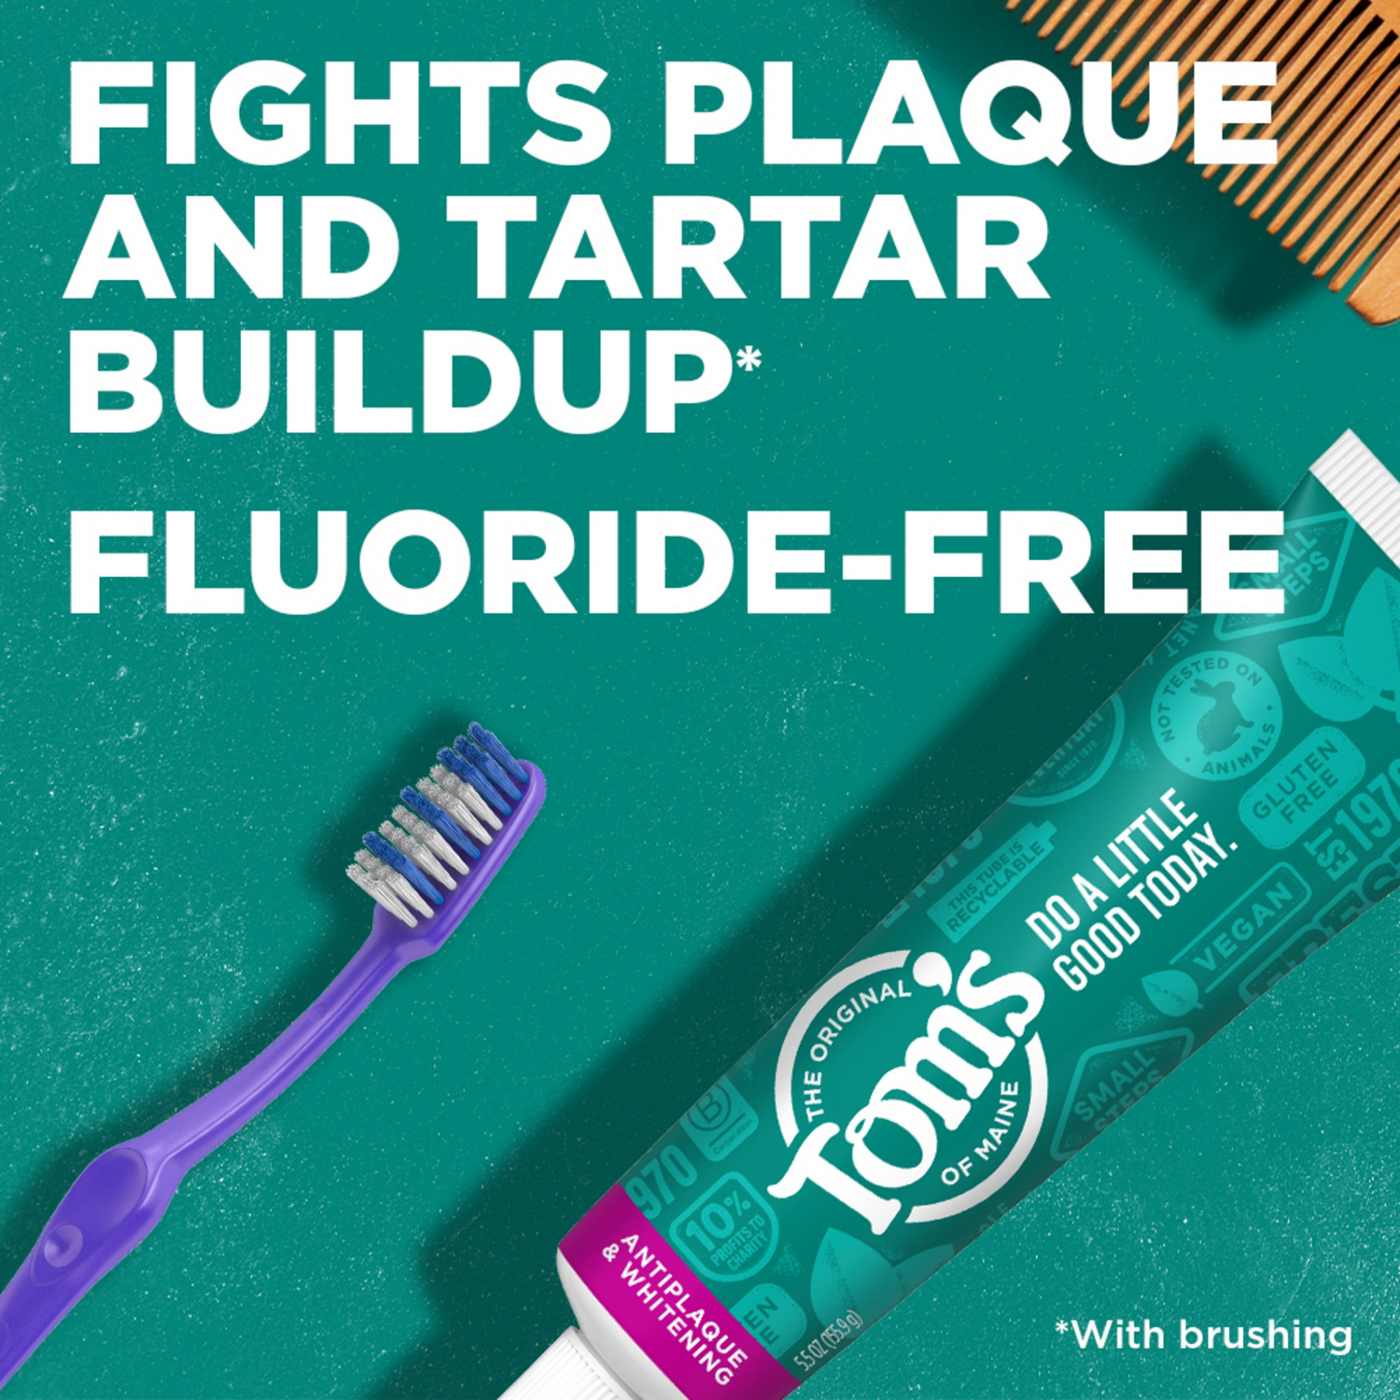 Tom's of Maine Fluoride-Free Antiplaque & Whitening Toothpaste - Peppermint; image 2 of 5